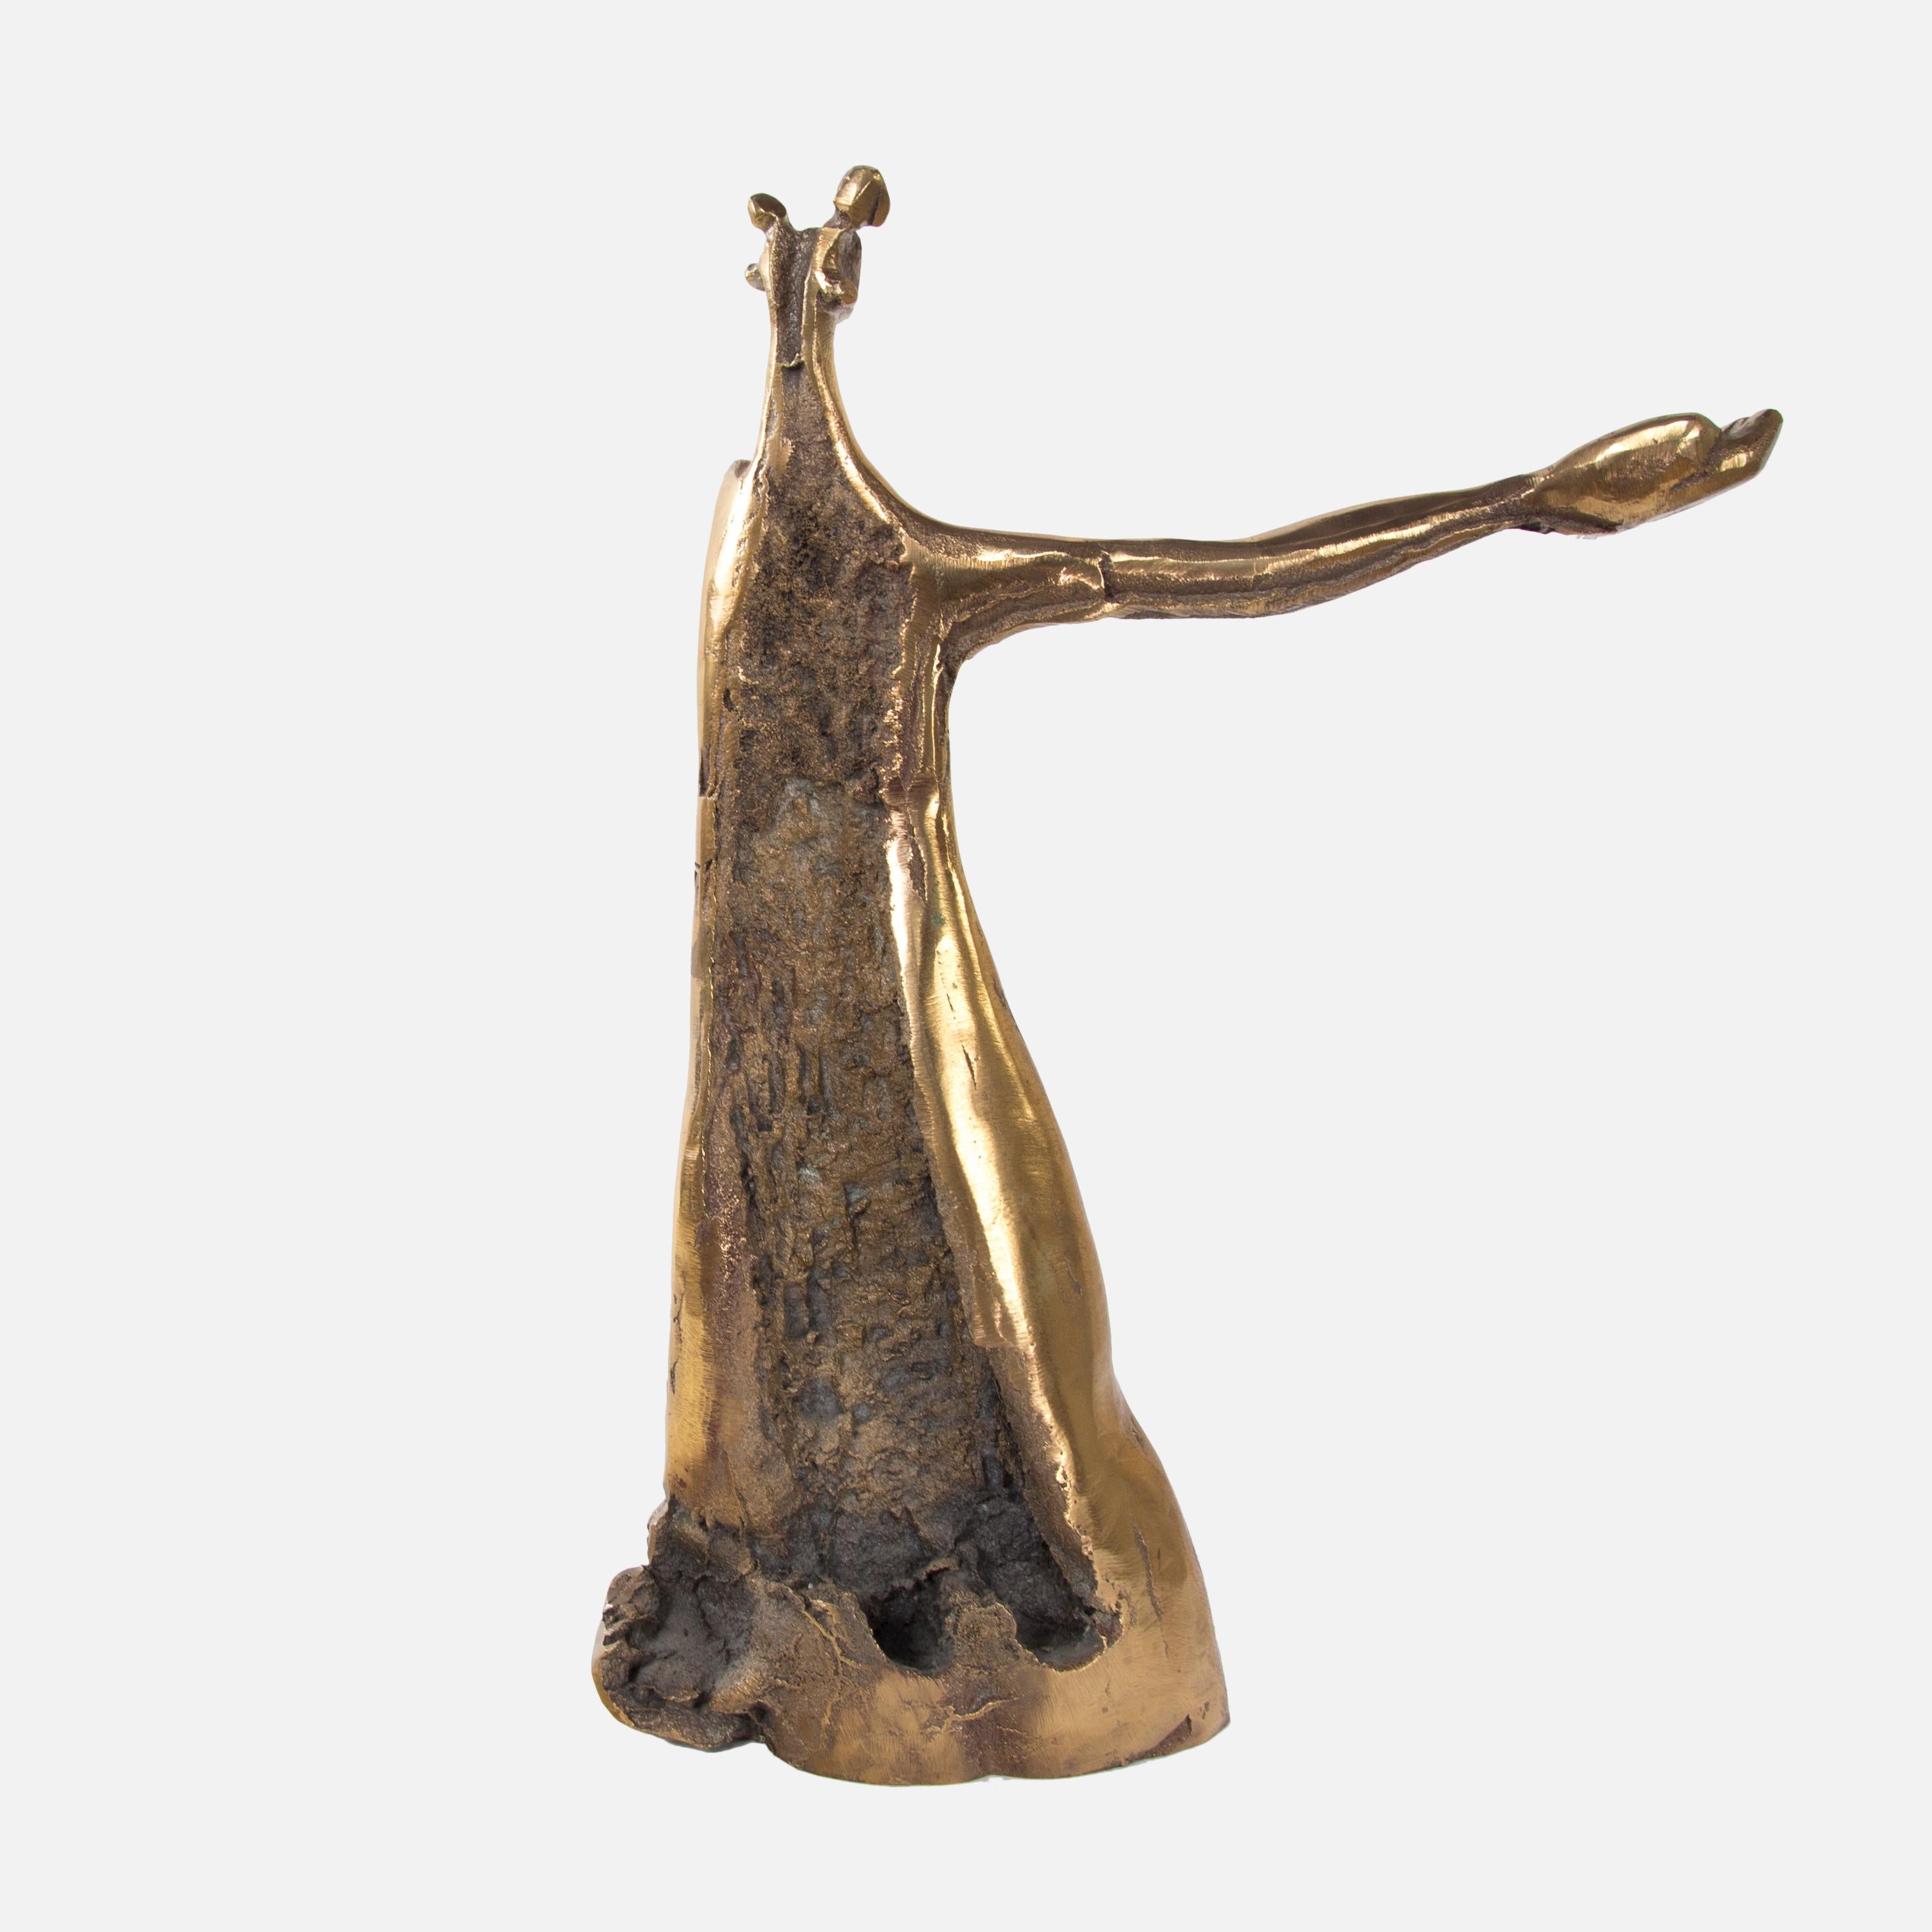 Abstract polished golden bronze sculpture of female depicted with sweeping lines and an outstretched charitable hand; The simple contours and the open lines enhance the simplicity; brightly polished; approximately 18.5